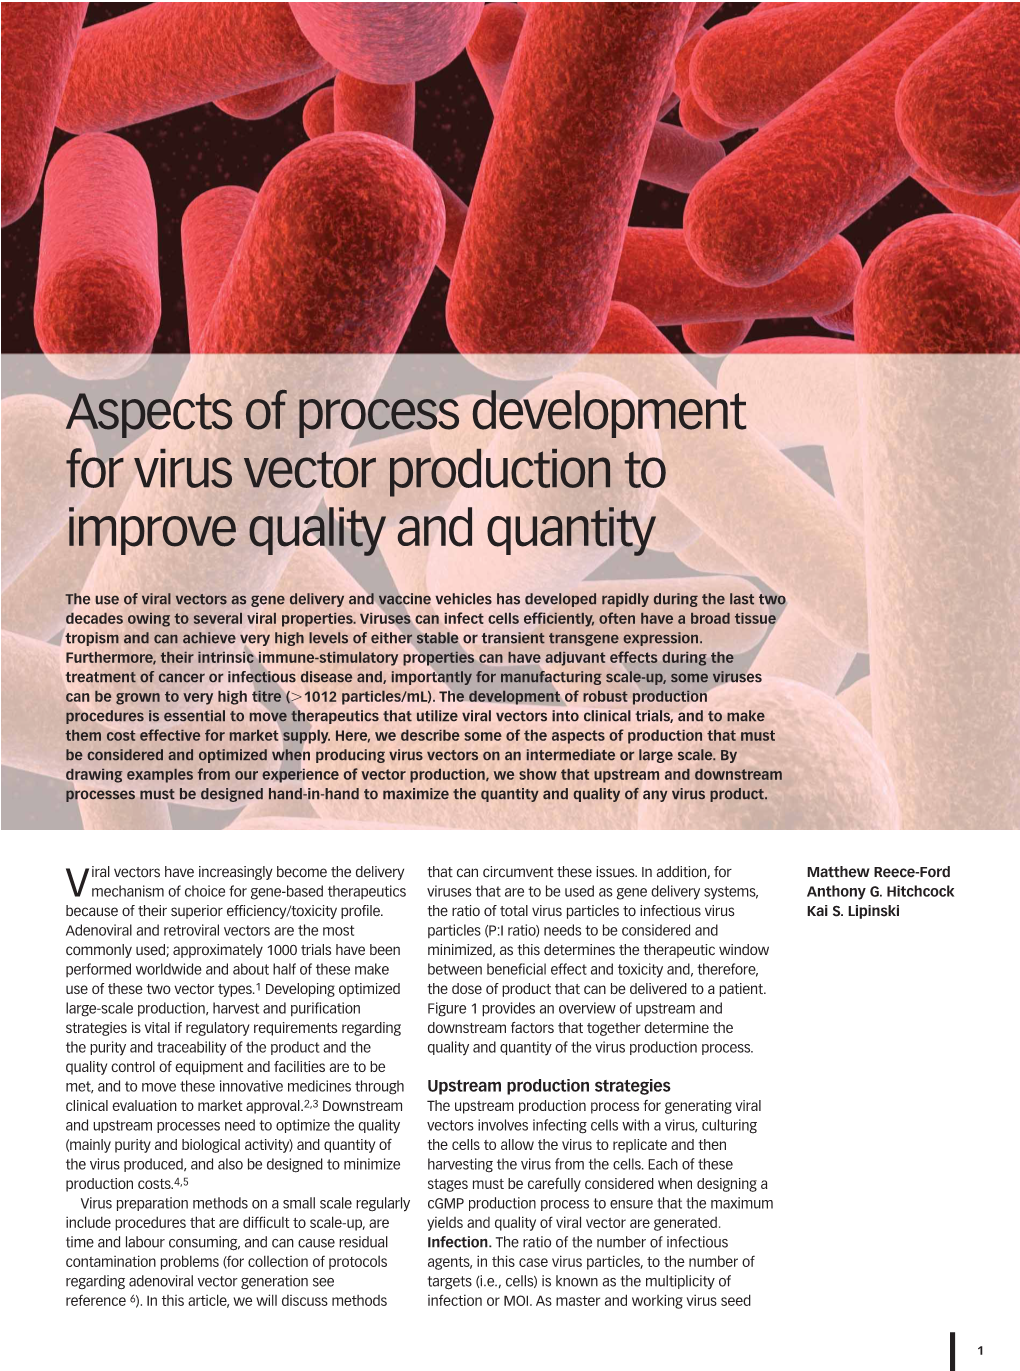 Aspects of Process Development for Virus Vector Production to Improve Quality and Quantity